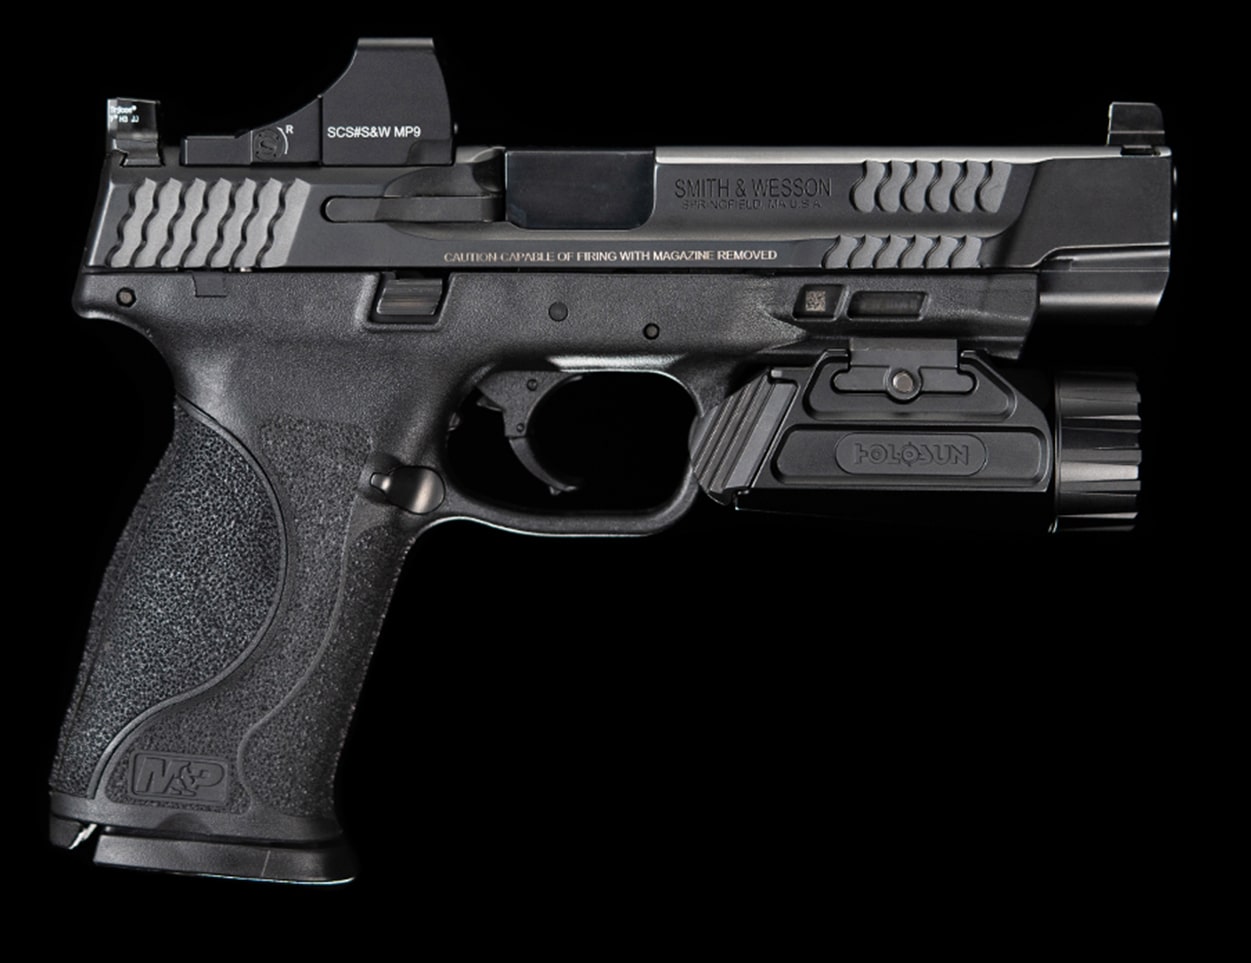 Holosun SCS MP2 Green Dot Fits S&W M&P 2.0 Fullsize/Compact with Factory Optic Cut - SCS-MP2-GR